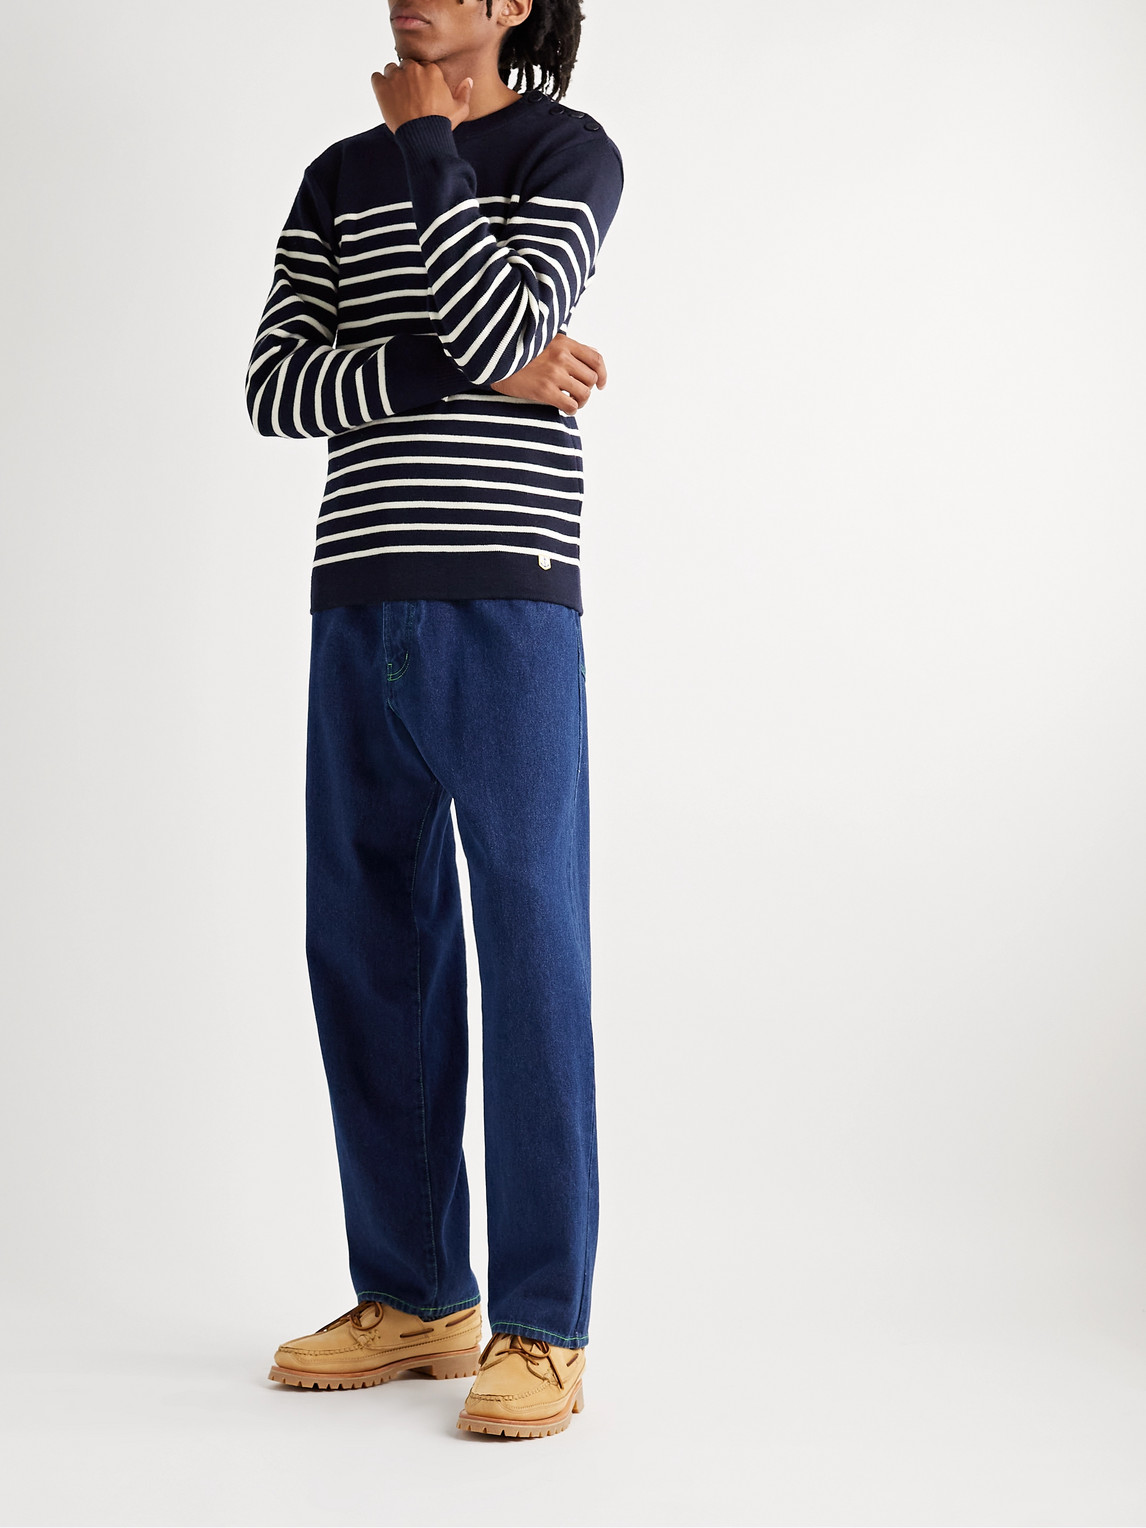 Armor-lux Groix Striped Navy Sweater Navire Milk Armor Lux In Blue |  ModeSens